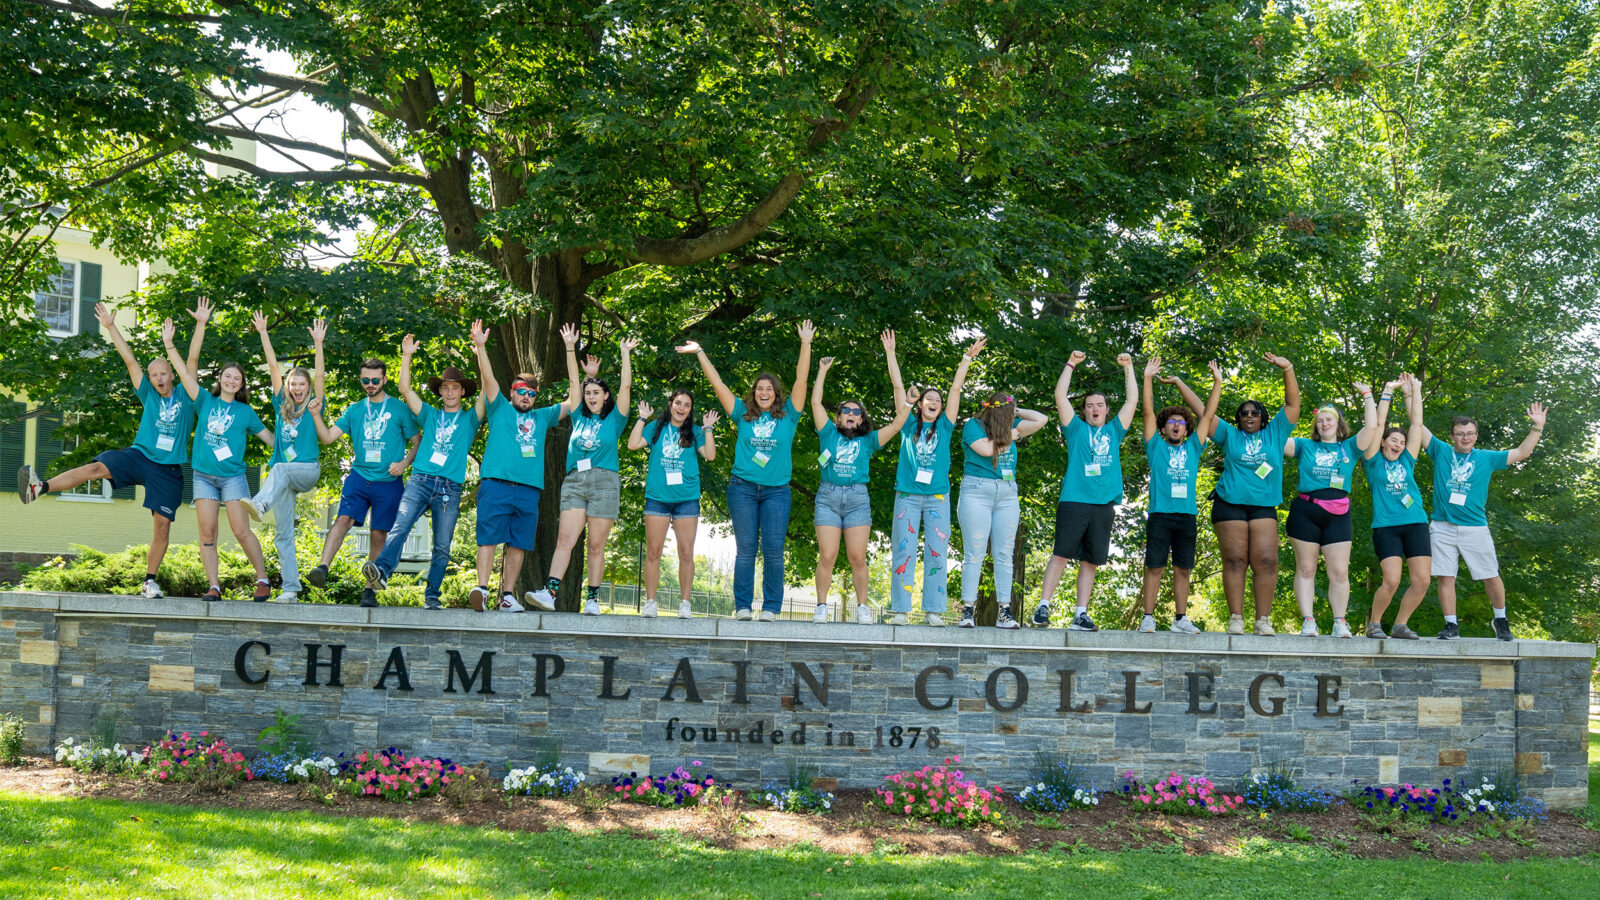 a group of 19 orientation leaders wearing matching blue shirts stand on a short wall that says "champlain college," raising their hands in the air and cheering